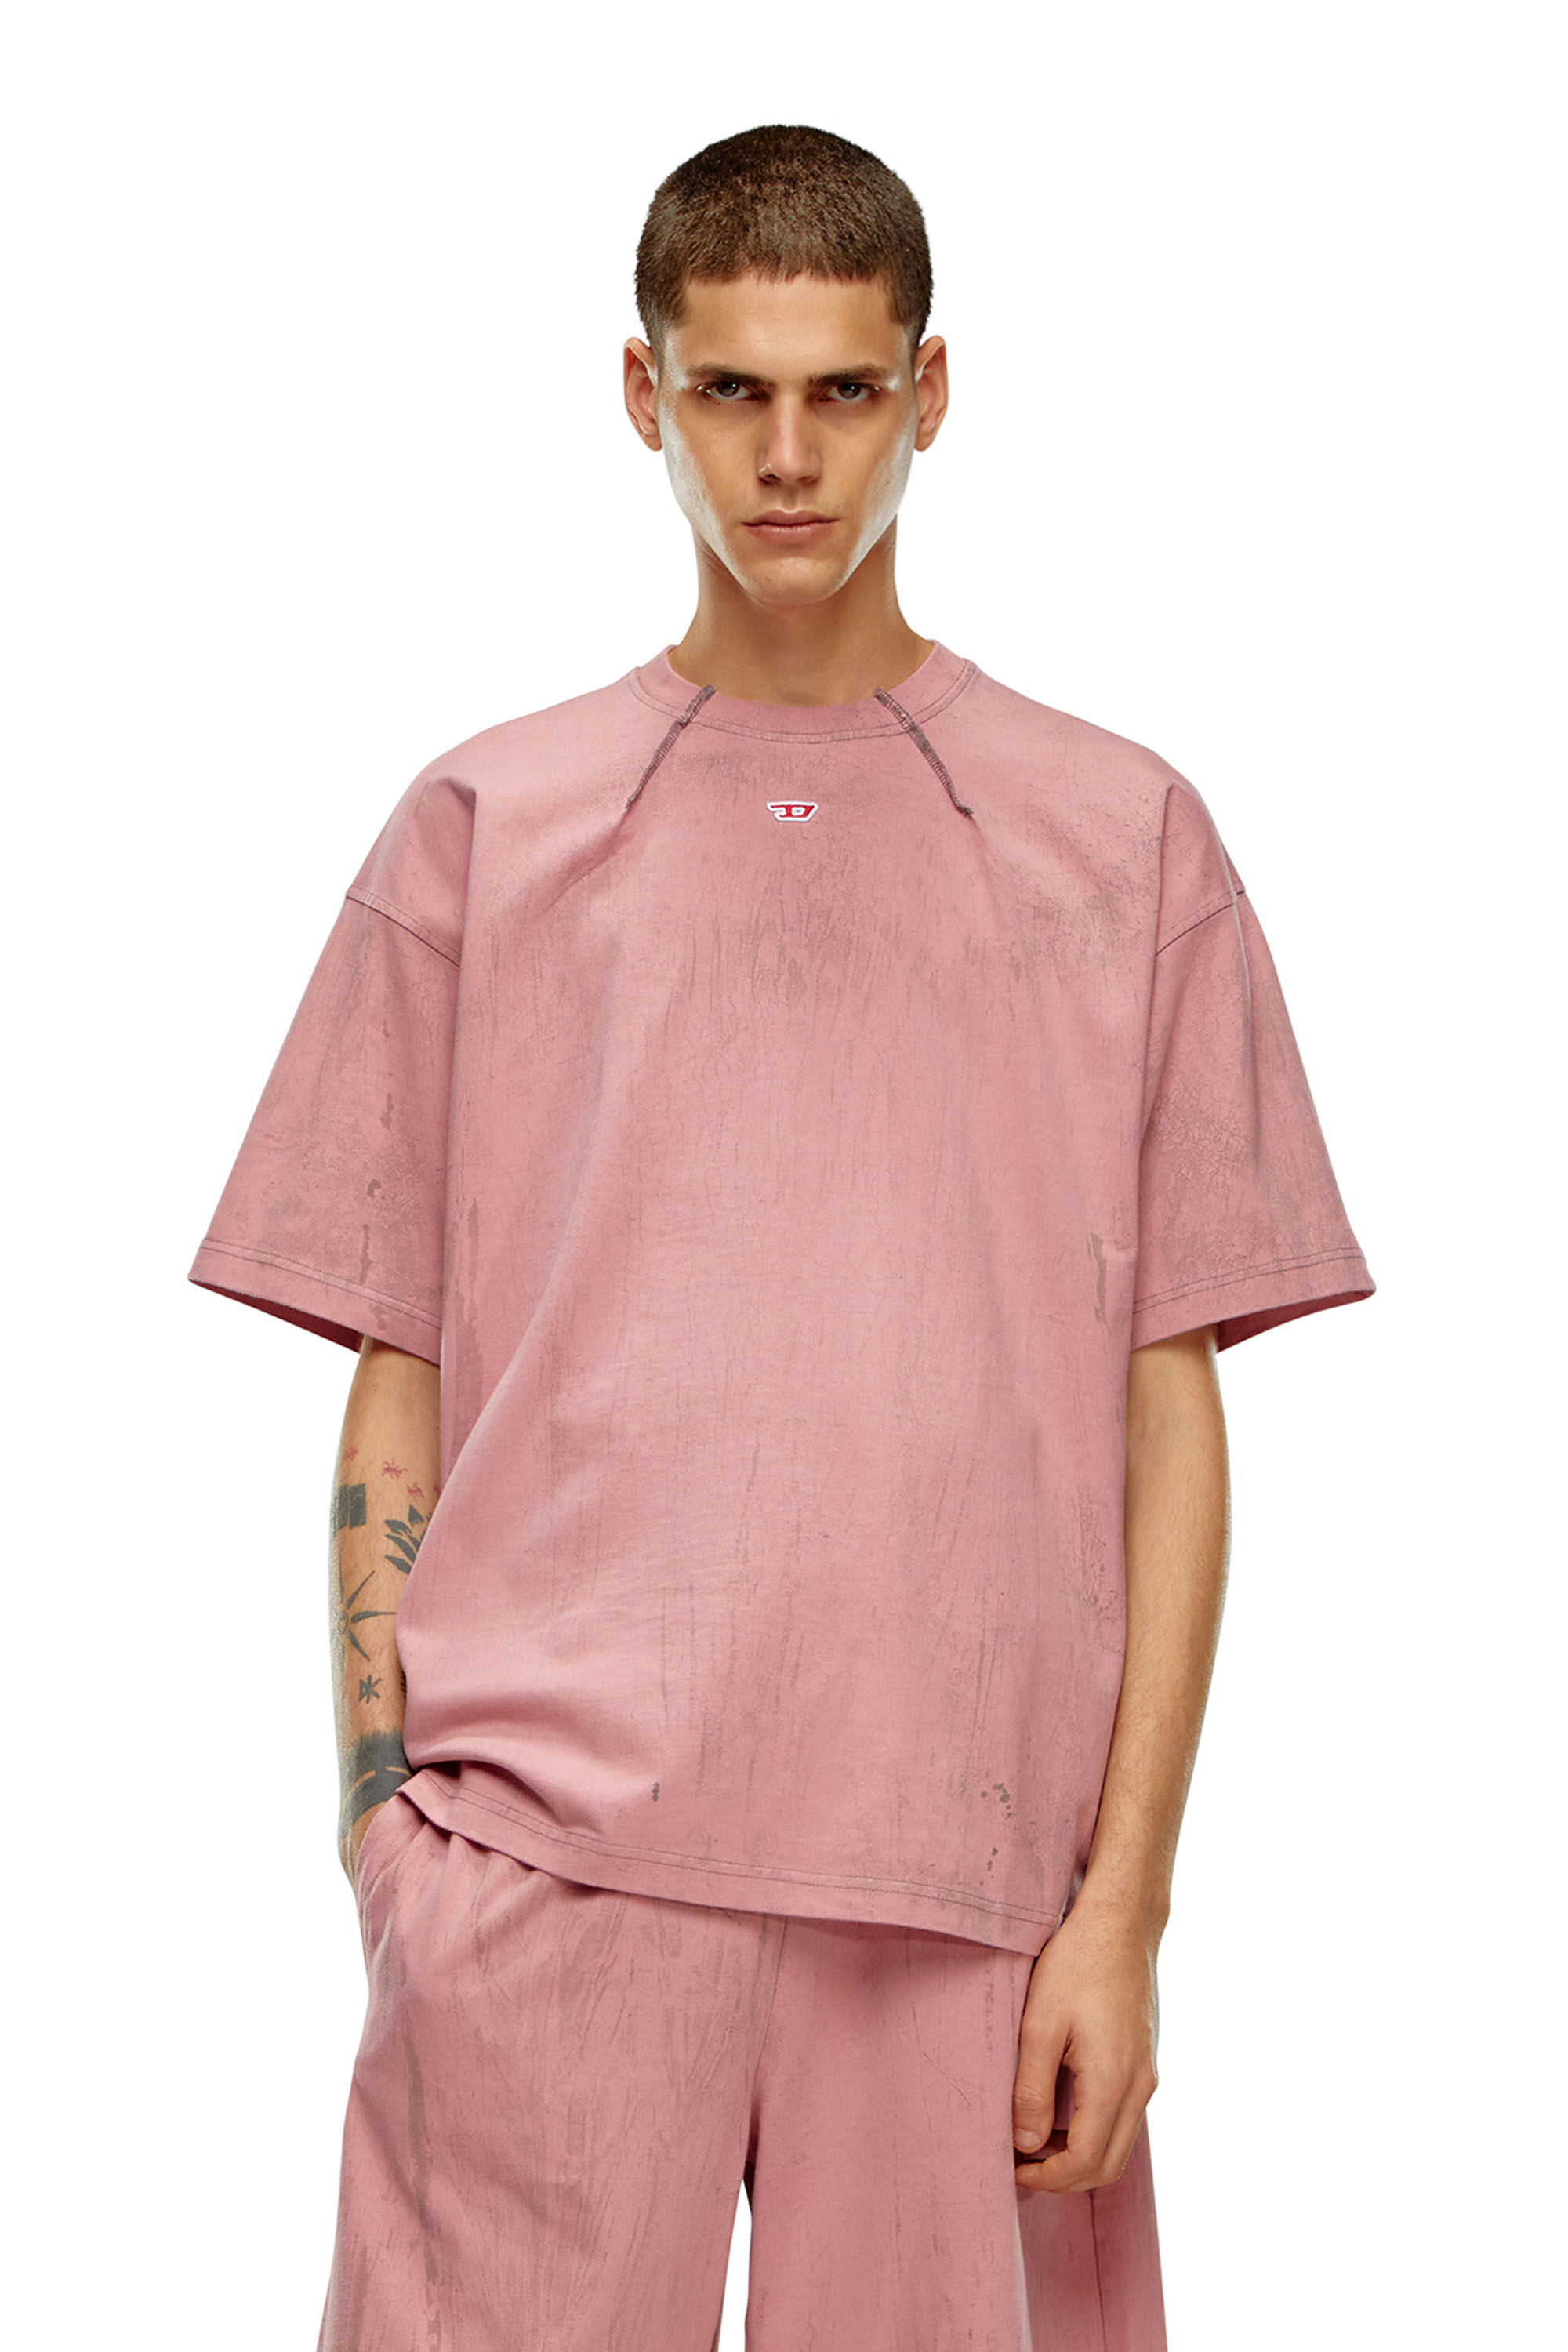 Diesel - T-COS, Uomo T-shirt in jersey effetto gesso in Rosa - Image 3